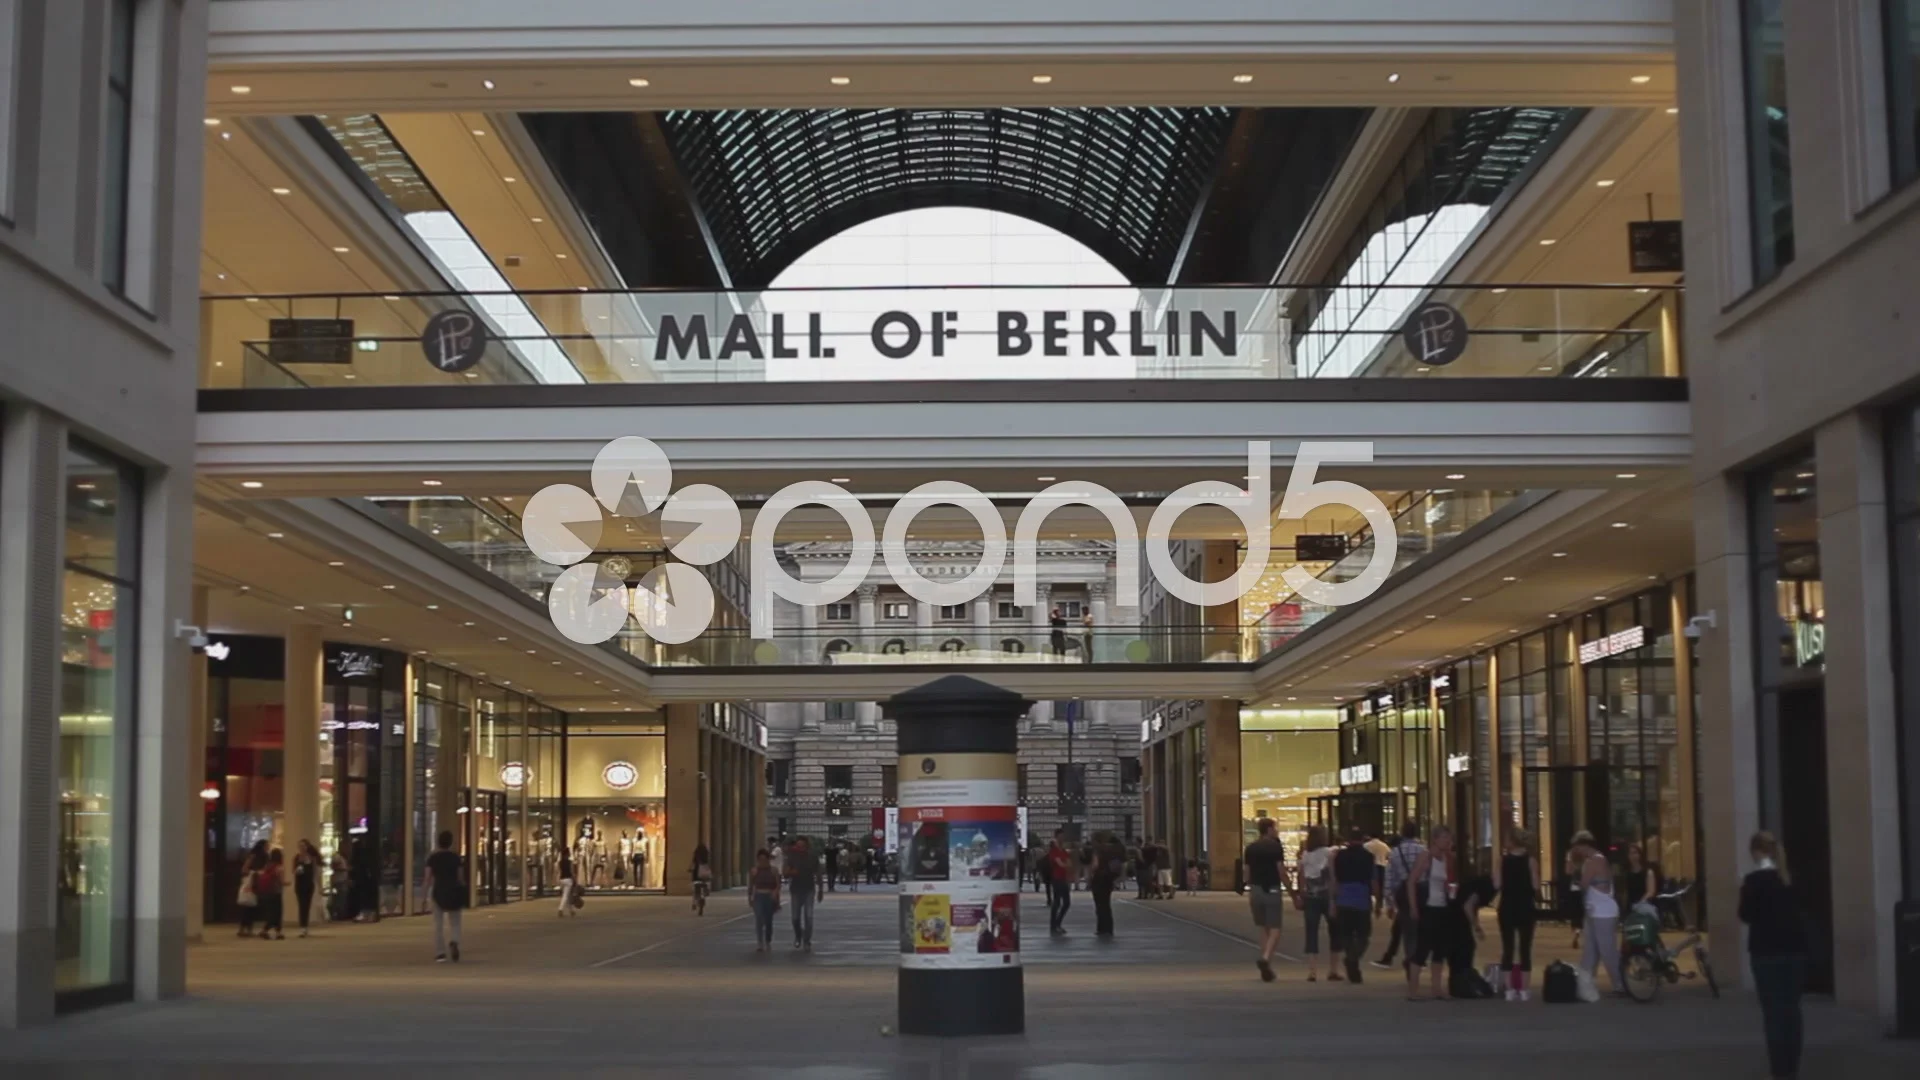 Berlin 24/7: Put a stop to shopping malls in Berlin! – DW – 12/17/2017